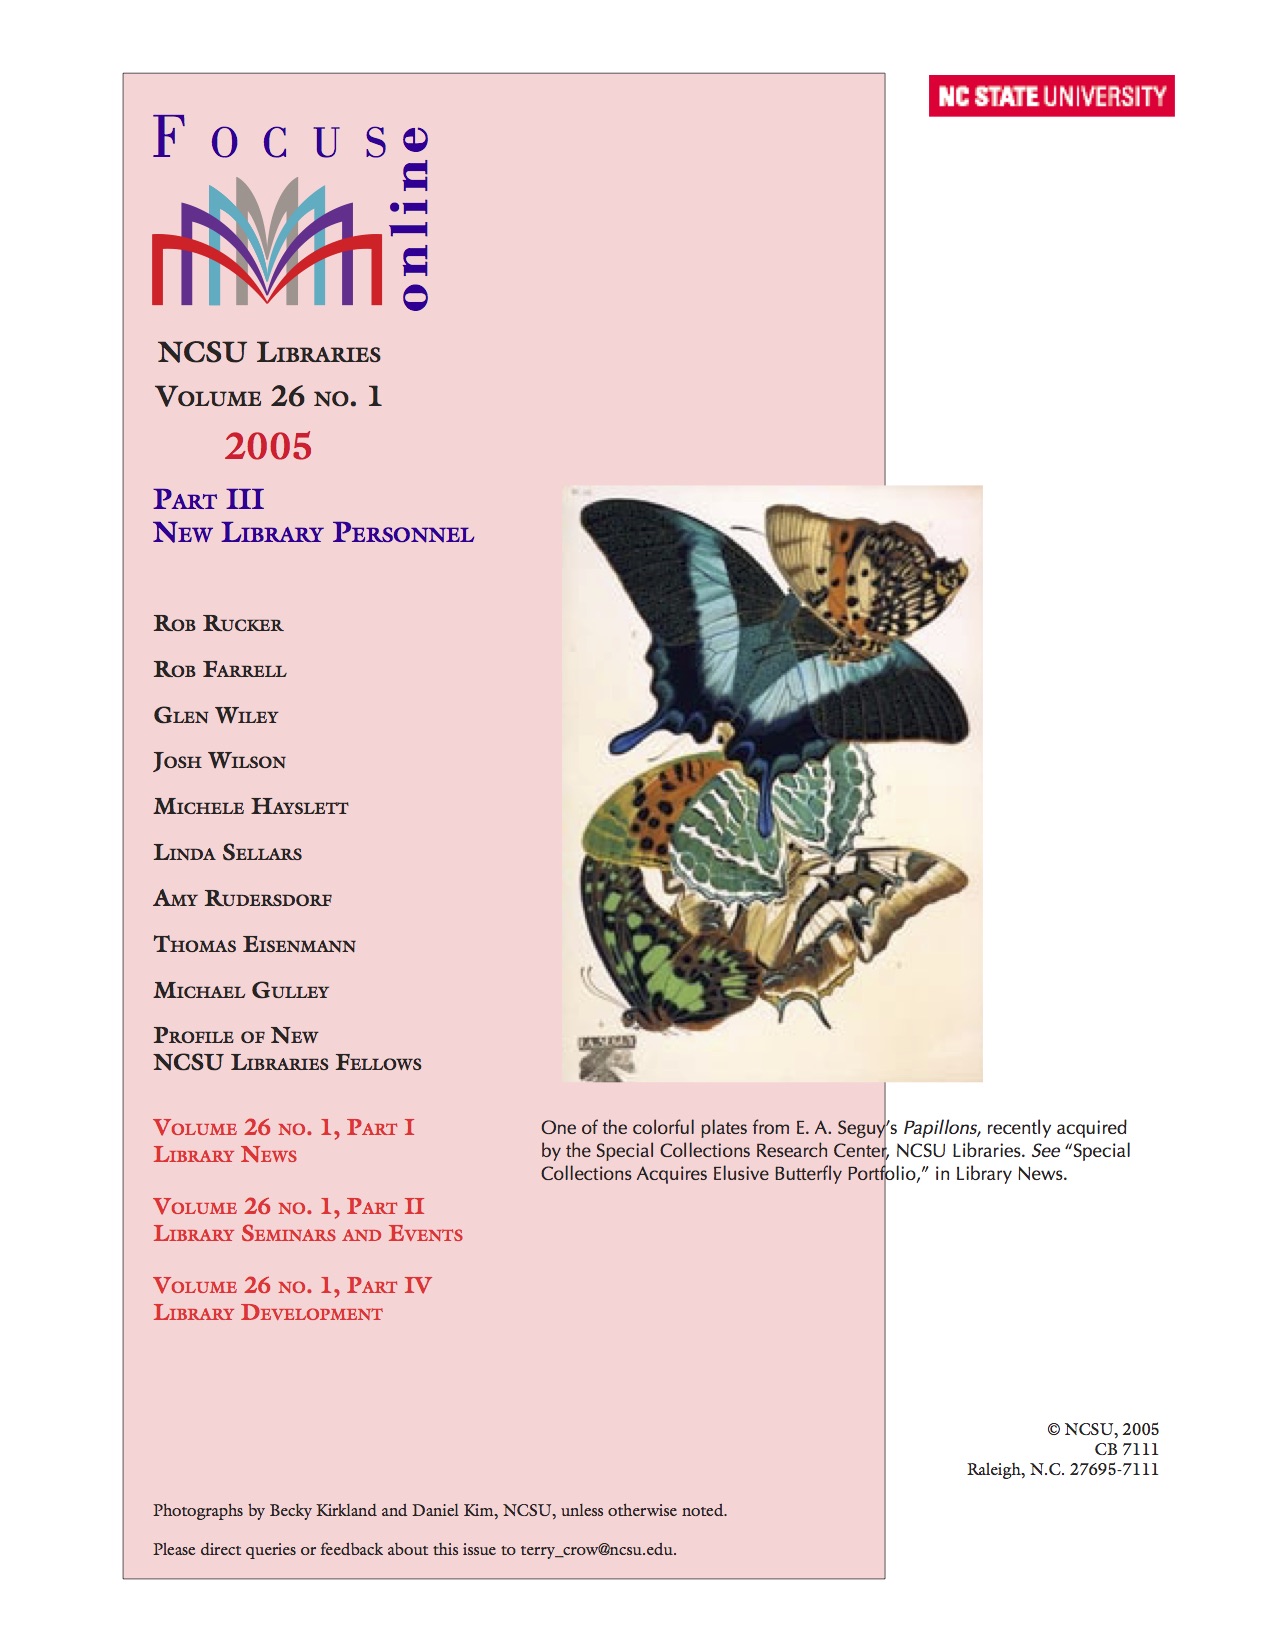 special collections of butterfly portfolio III